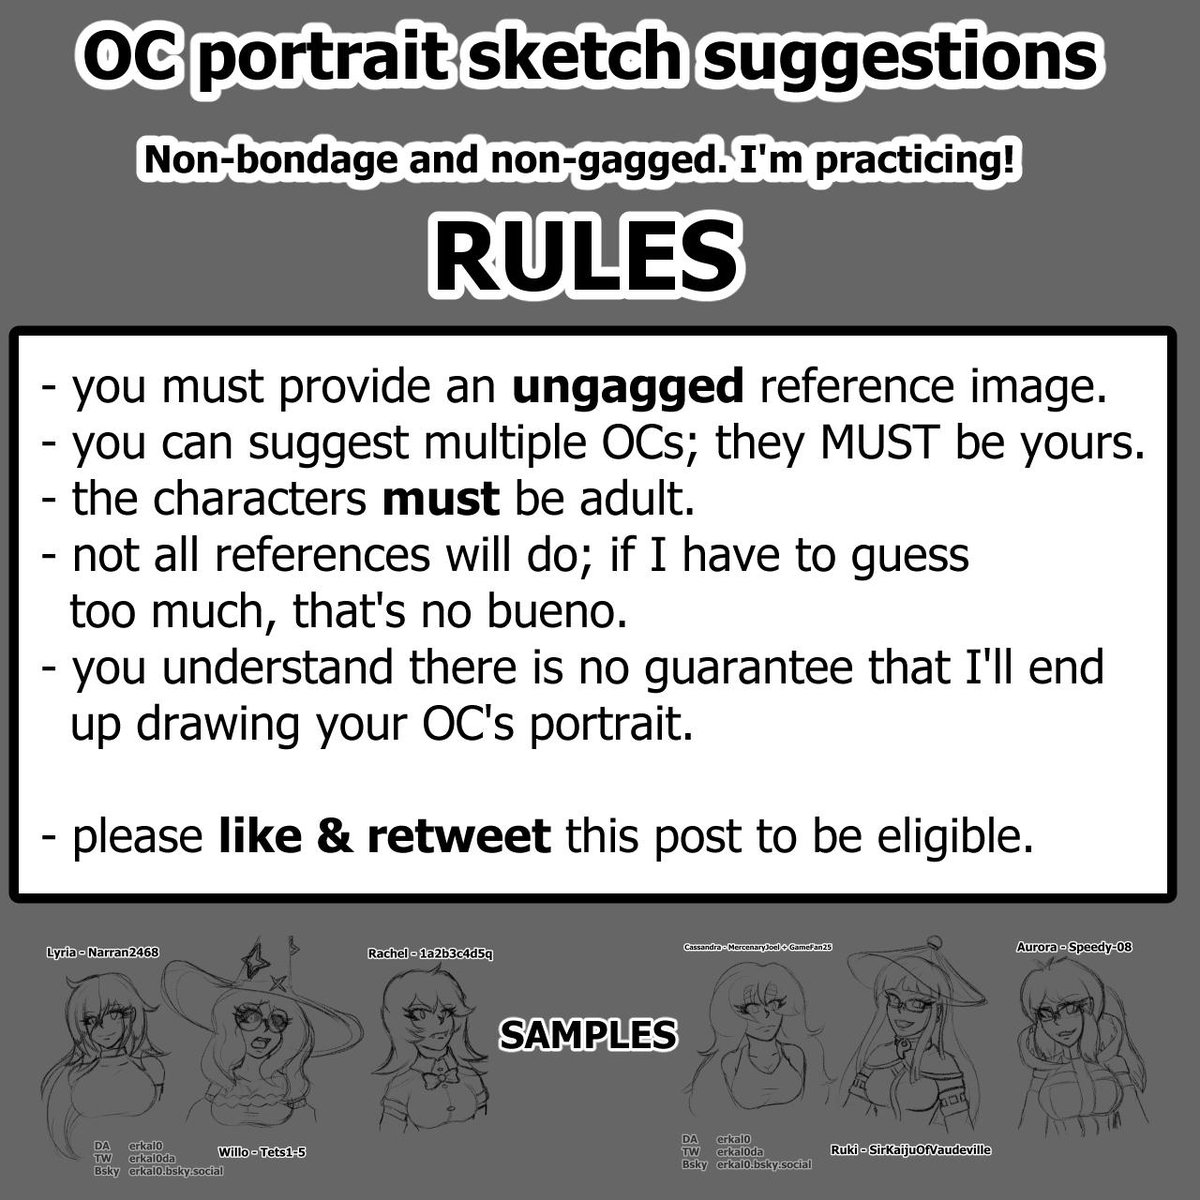 So here's something I've done on DA for practicing purpose, and will try here as well: suggest your OCs with reference, and I may do a *non-bondage* portrait of them. Please read and follow the rules. Rules may be subject to change. Comes with no guarantee!